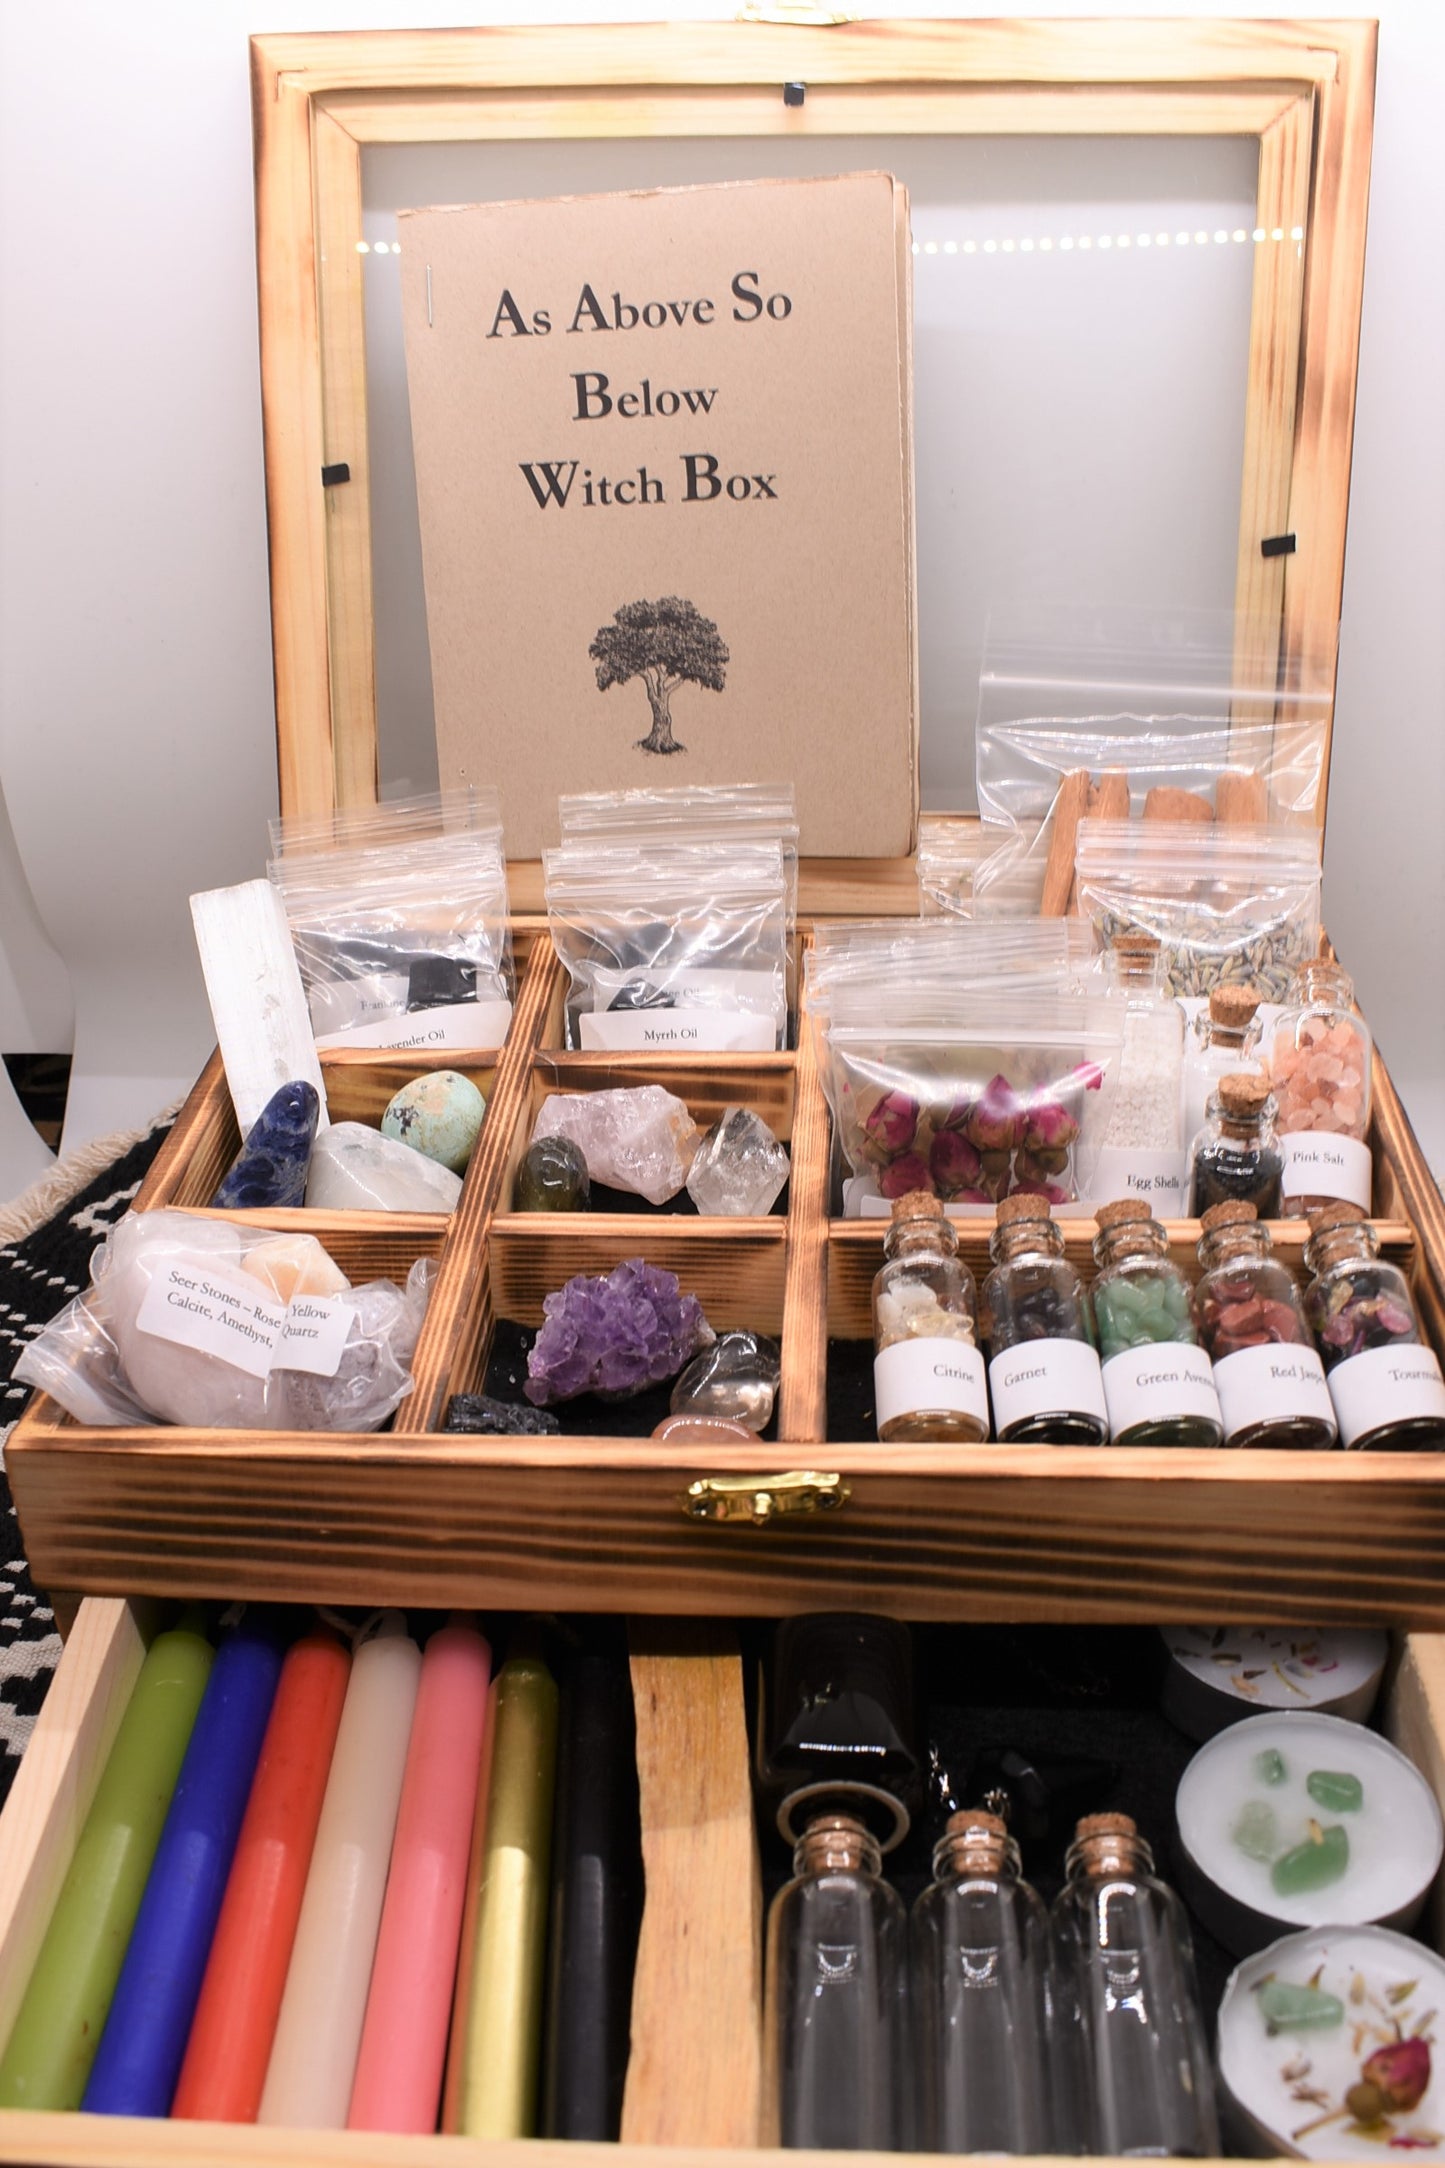 As Above So Below Witch Box - #1